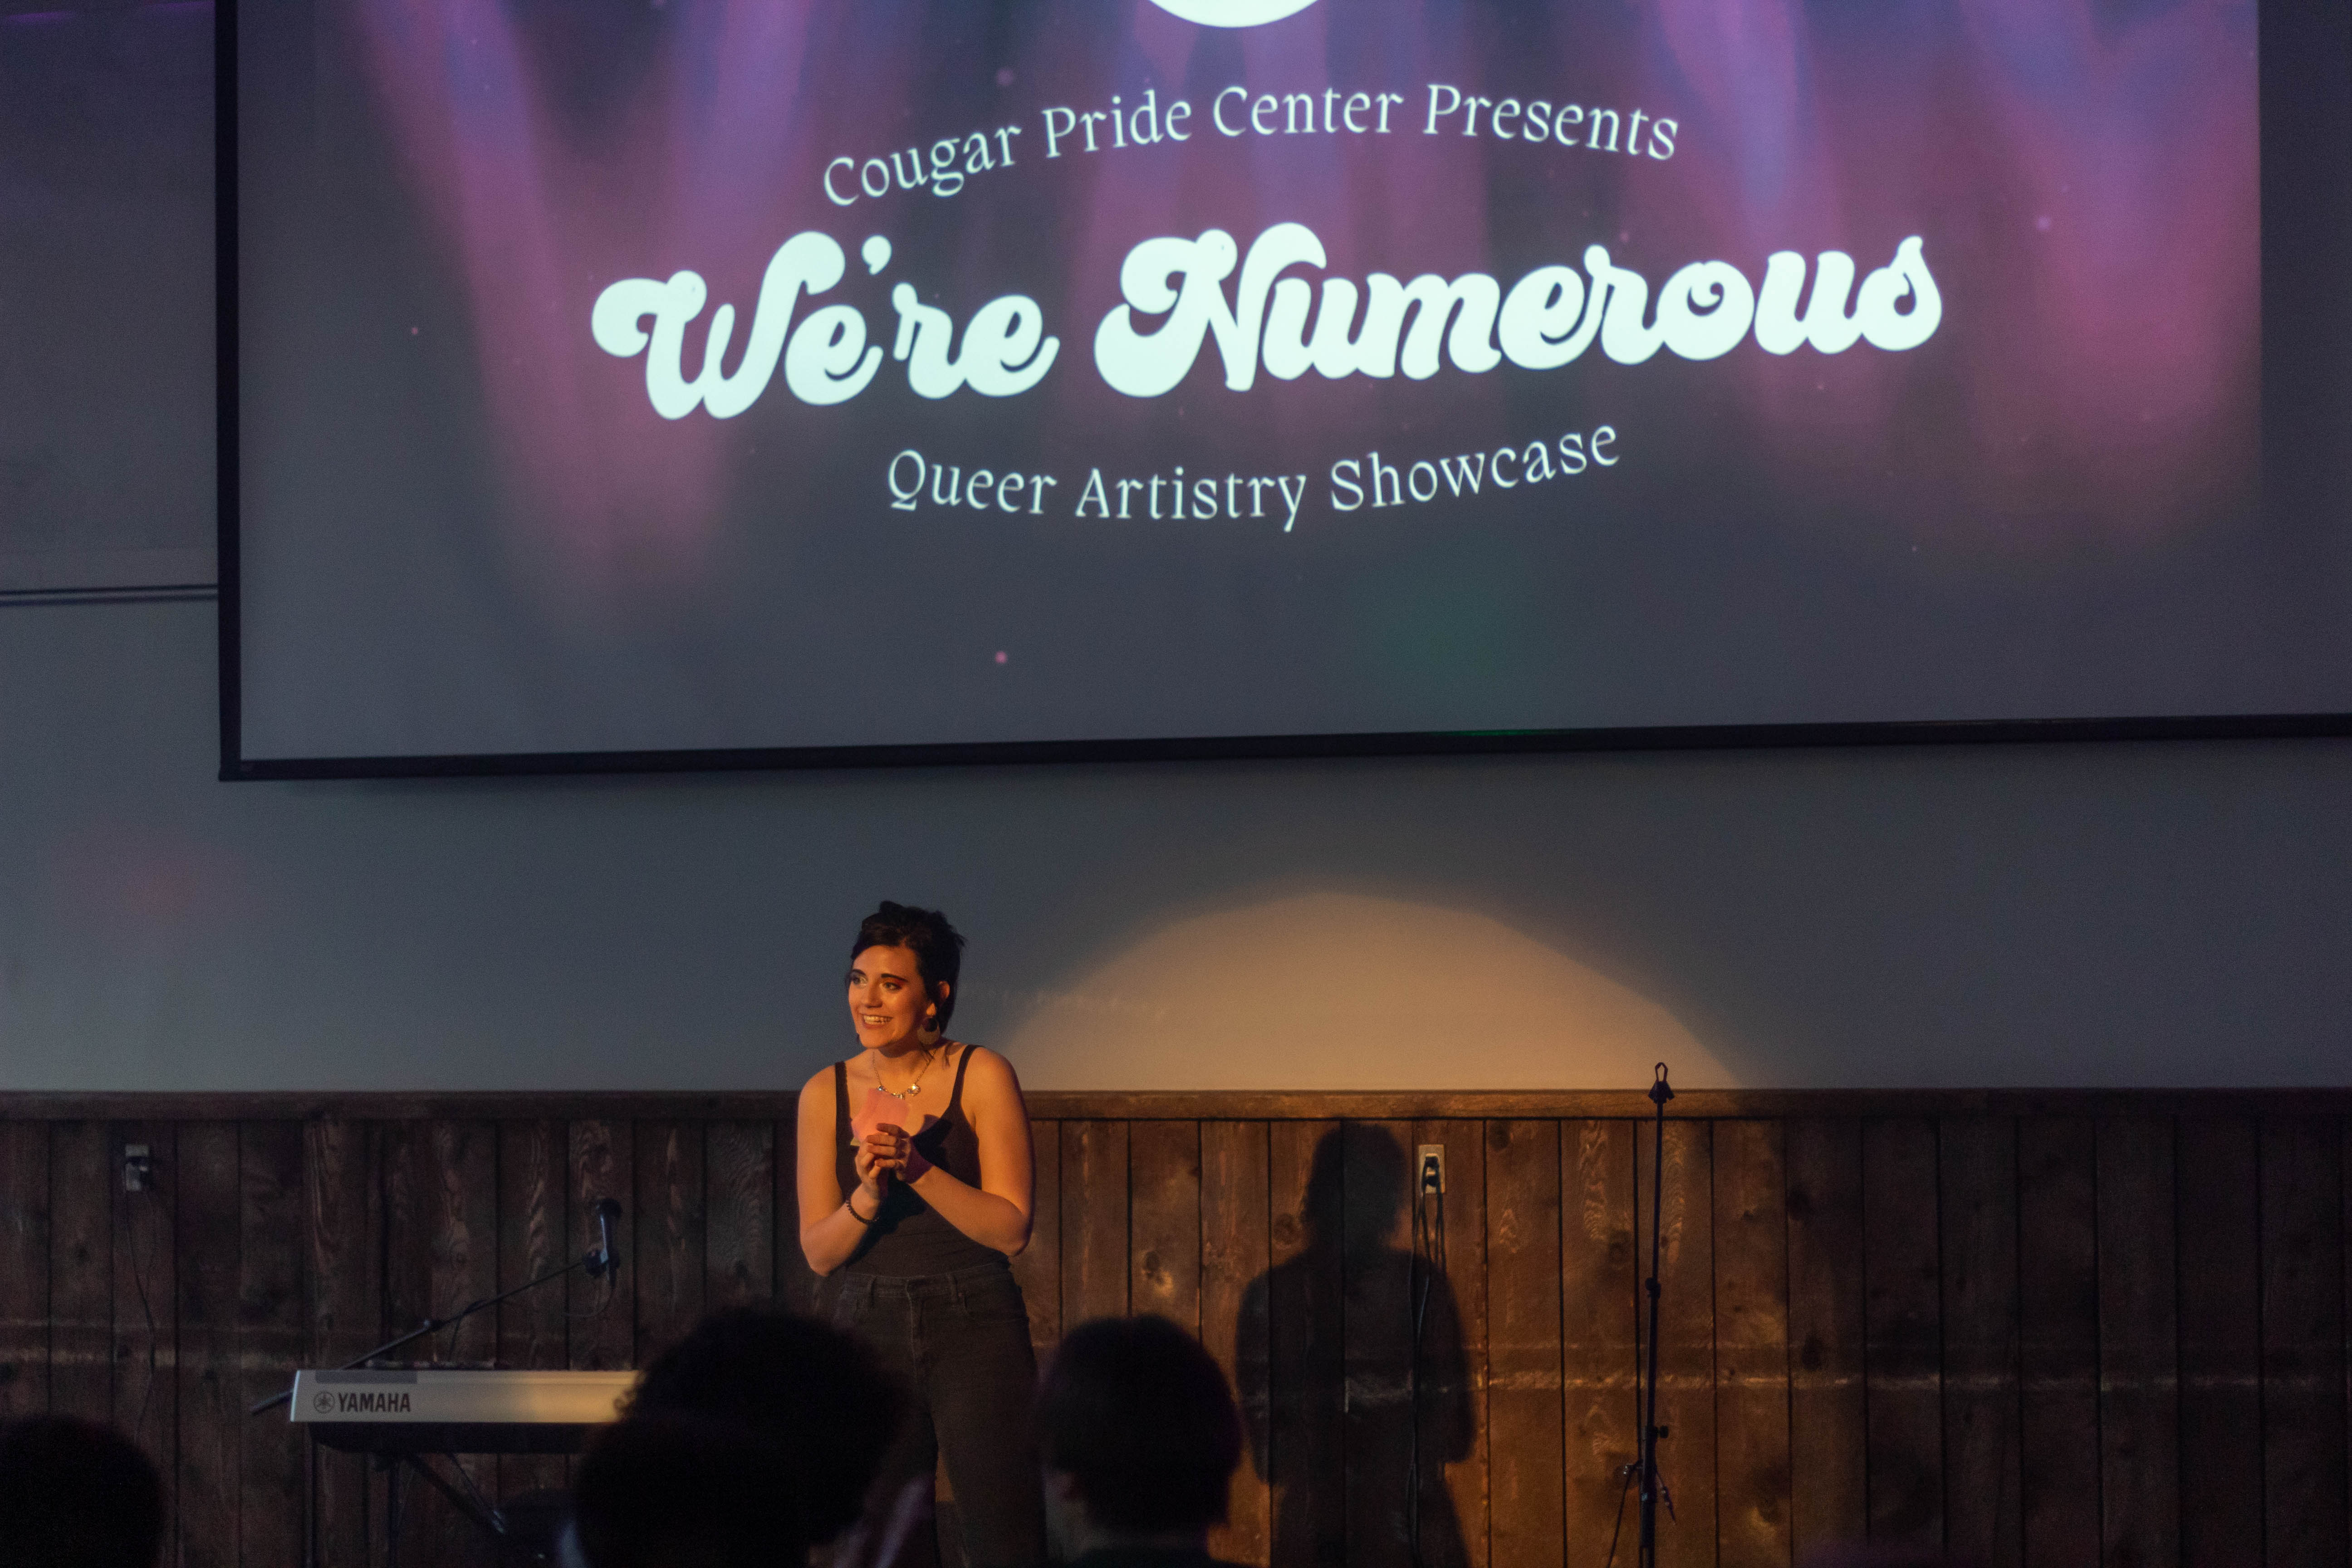 A woman stands on a stage under a screen showing the words "Cougar Pride Center Presents 'We're Numerous' Queer Artistry Showcase."